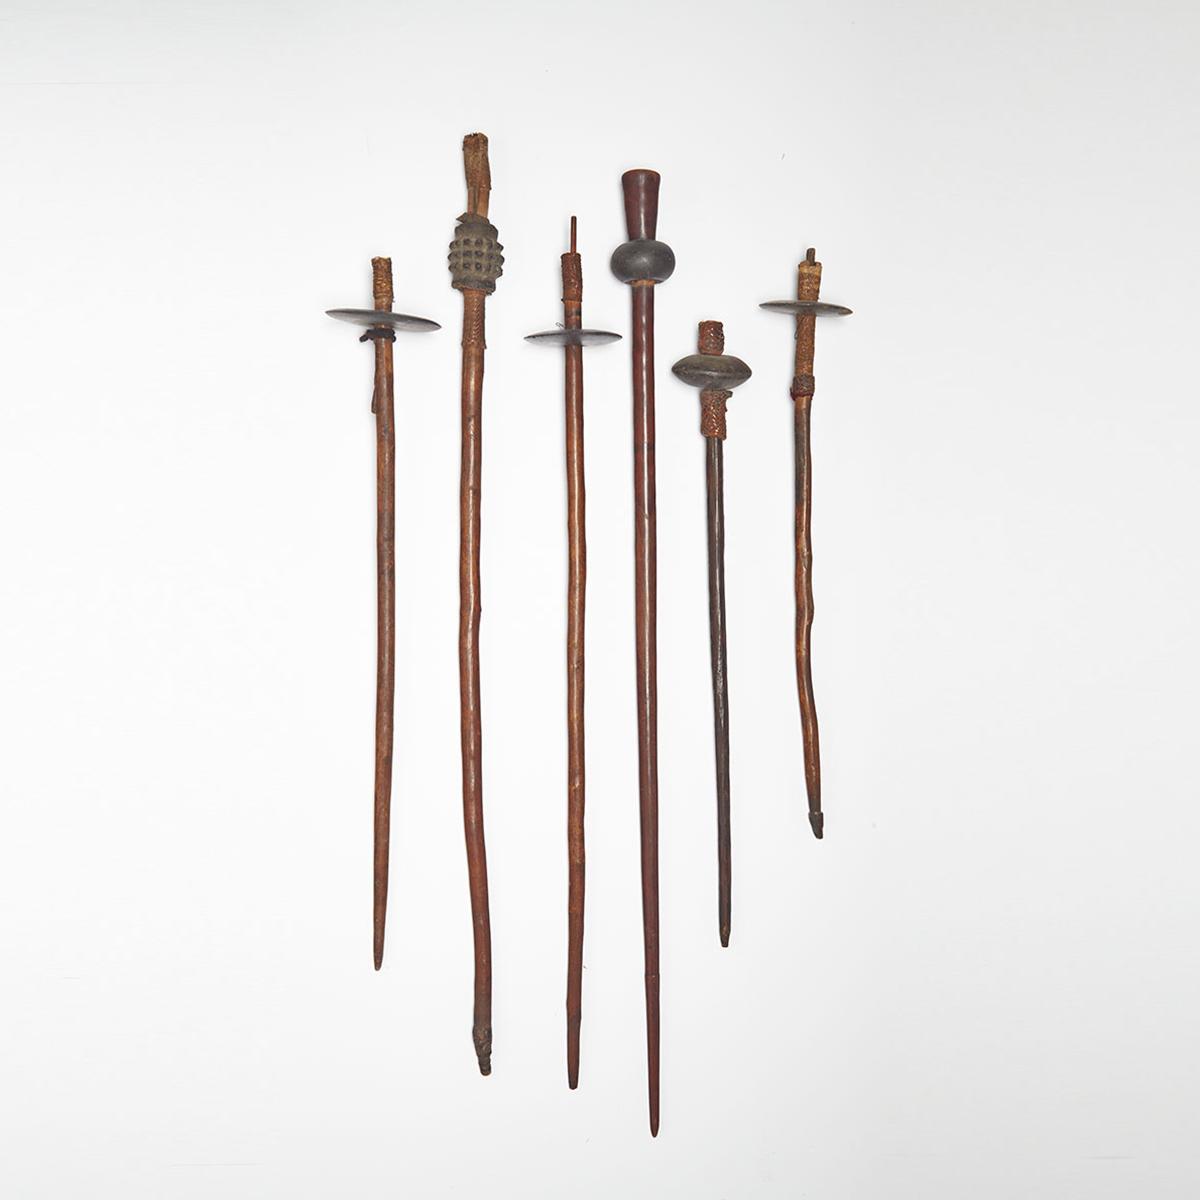 Six Papua New Guinea Clubs, 19th/early 20th century